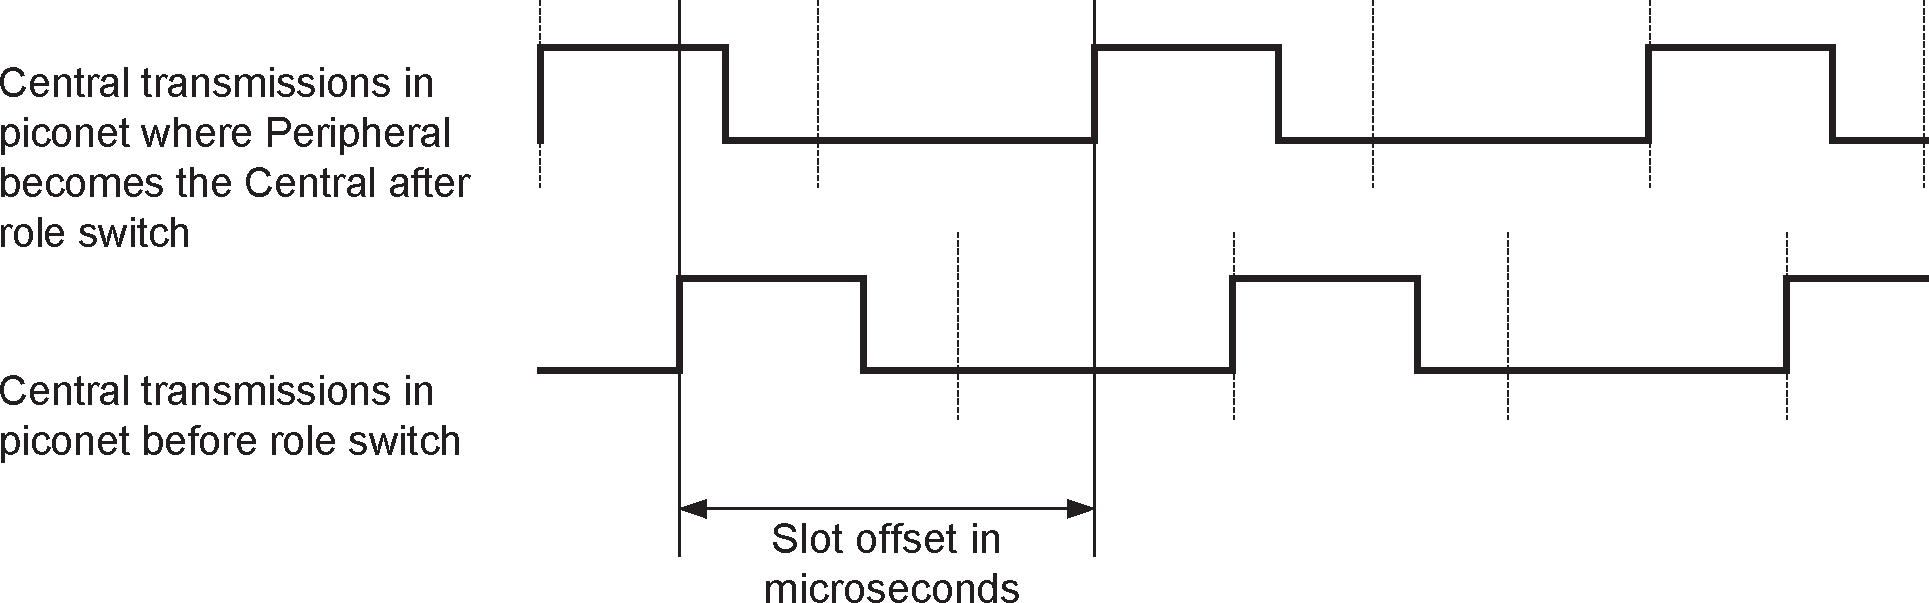 Slot offset for role switch